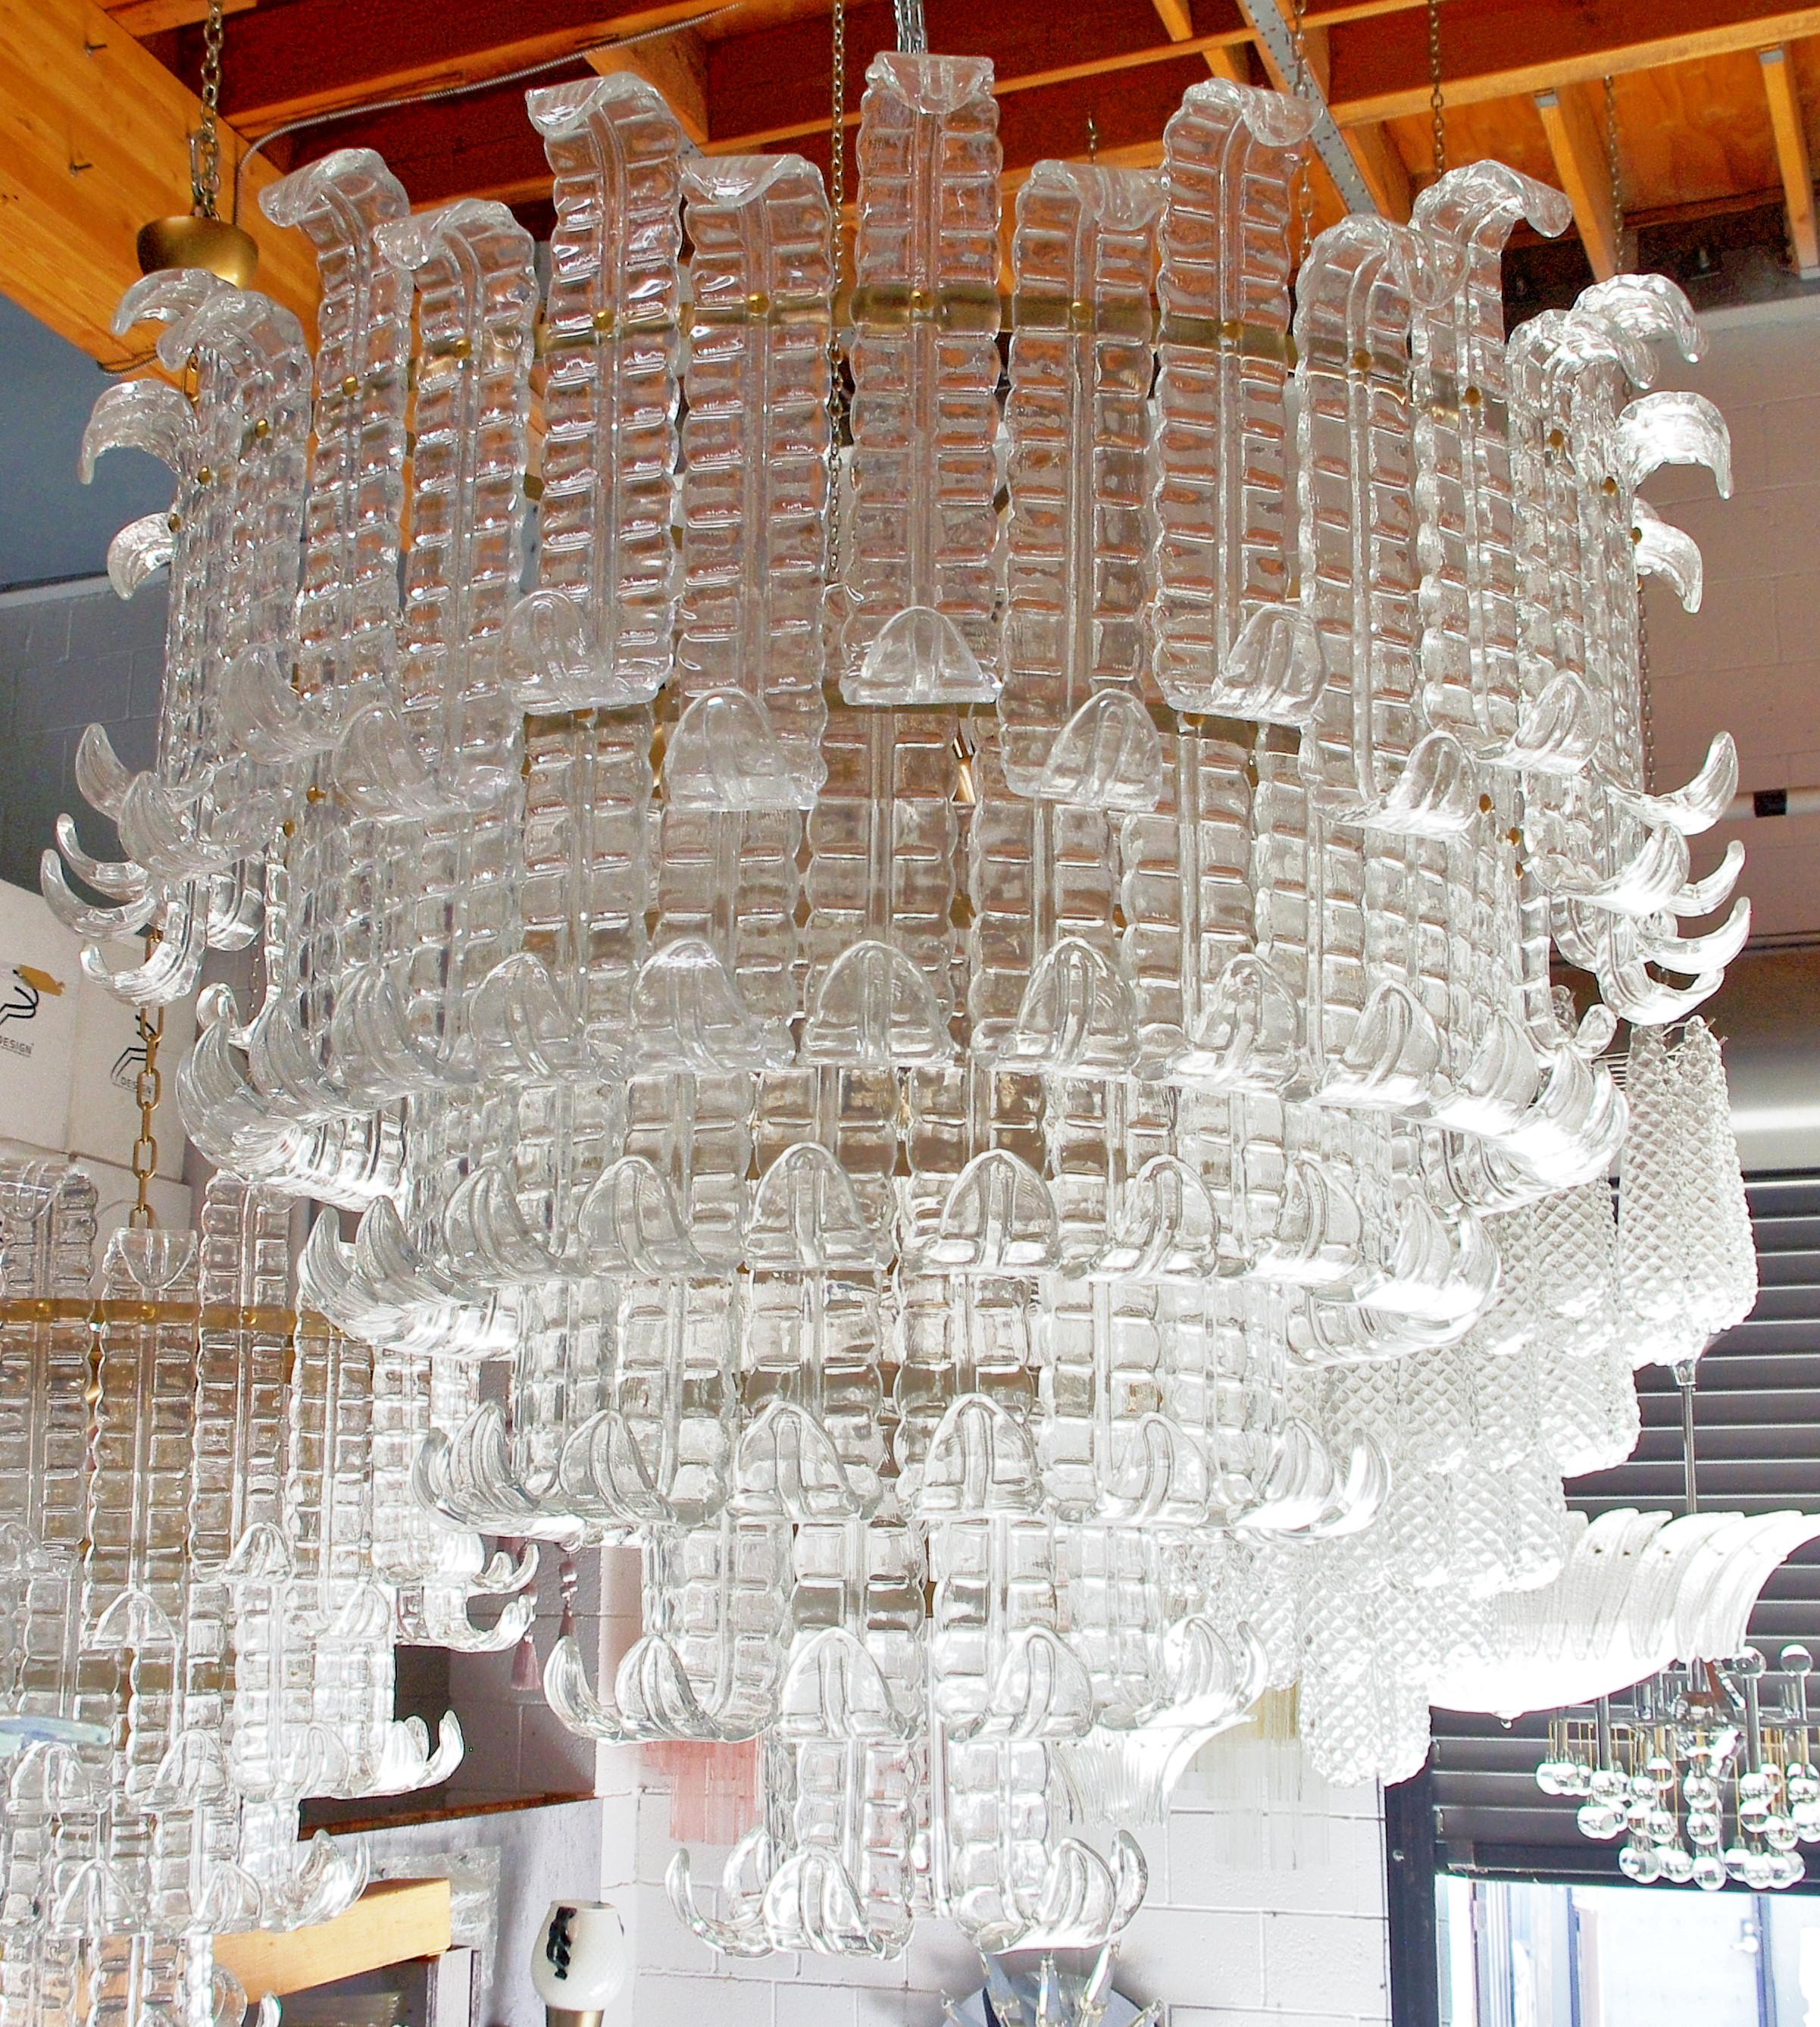 Italian chandelier shown with six tiers of clear hand blown Murano Felci fern glasses mounted on bronzed finish metal frame, by Fabio Ltd / Made in Italy
22 lights, E26 or E27 type, max 60W each
Measures: Diameter: 43.5 inches, Height: 39.5 inches